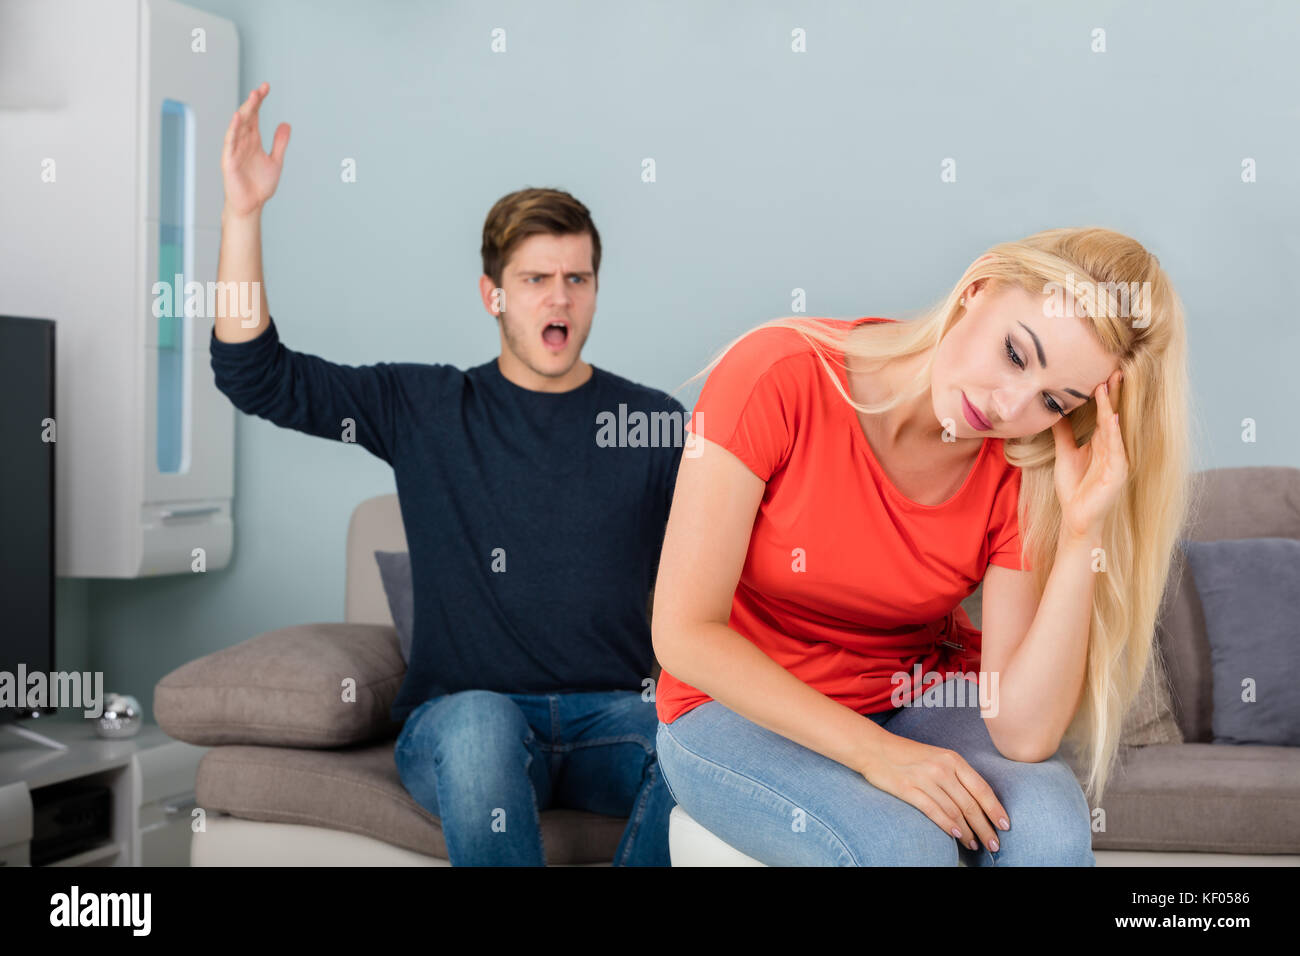 Angry Man Shouting To His Wife While Arguing About Infidelity And Divorce In Living Room Stock Photo